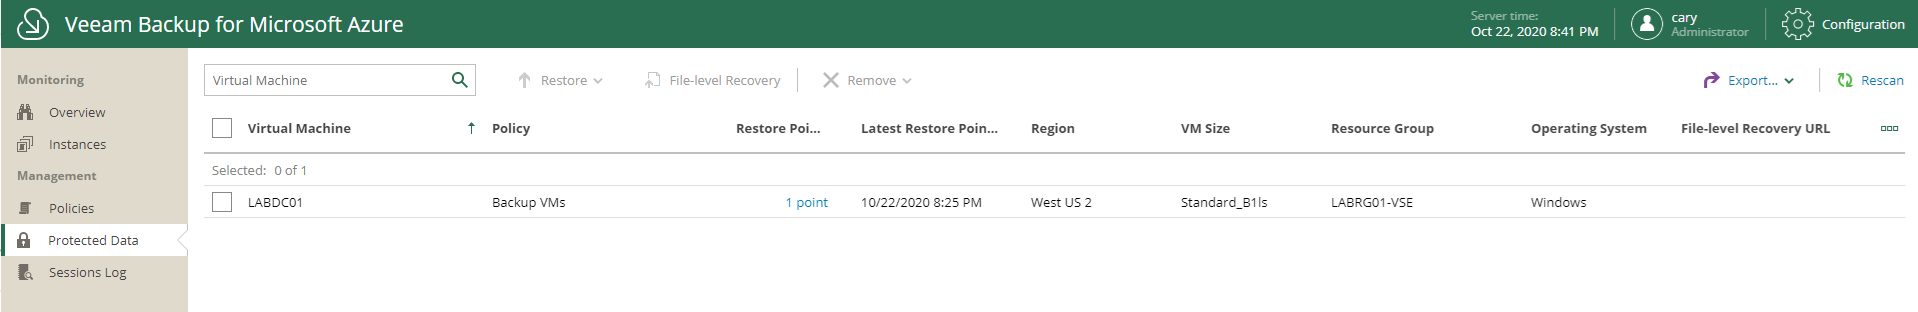 102220 2115 HowtoConfig58 - How to configure Veeam Backup for Microsoft Azure 1.0 with auto create service account